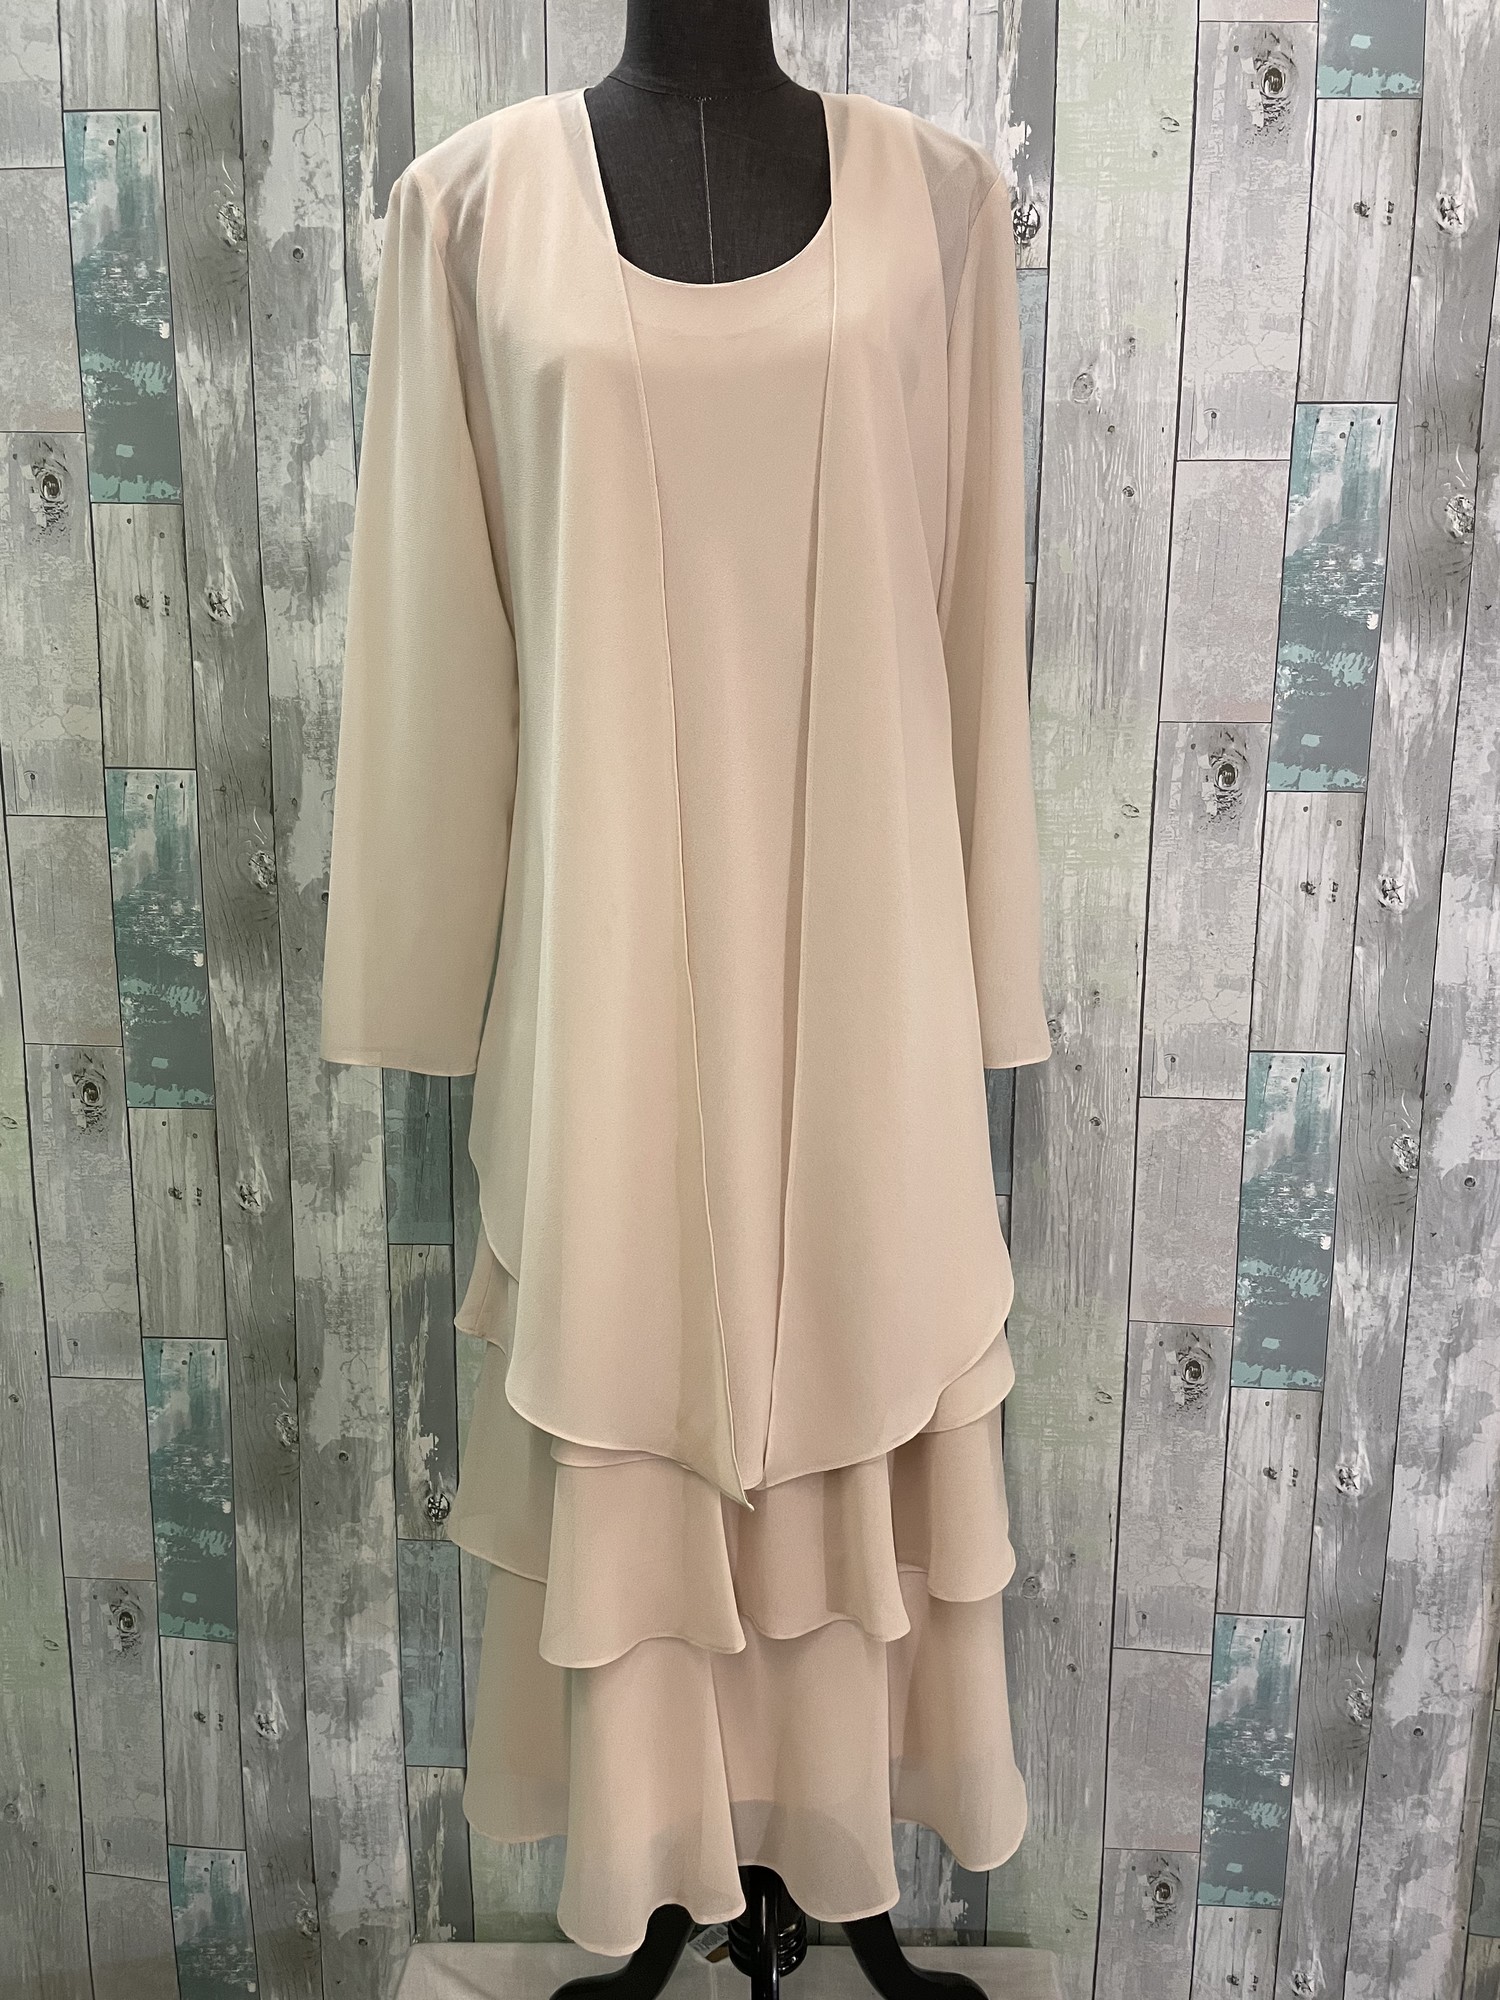 JC Collections 2 Pc Formal
Sheer 100% polyester dress with long flowy jacket
Ruffle at the hemline, 3/4 length
Tan
Size: Medium